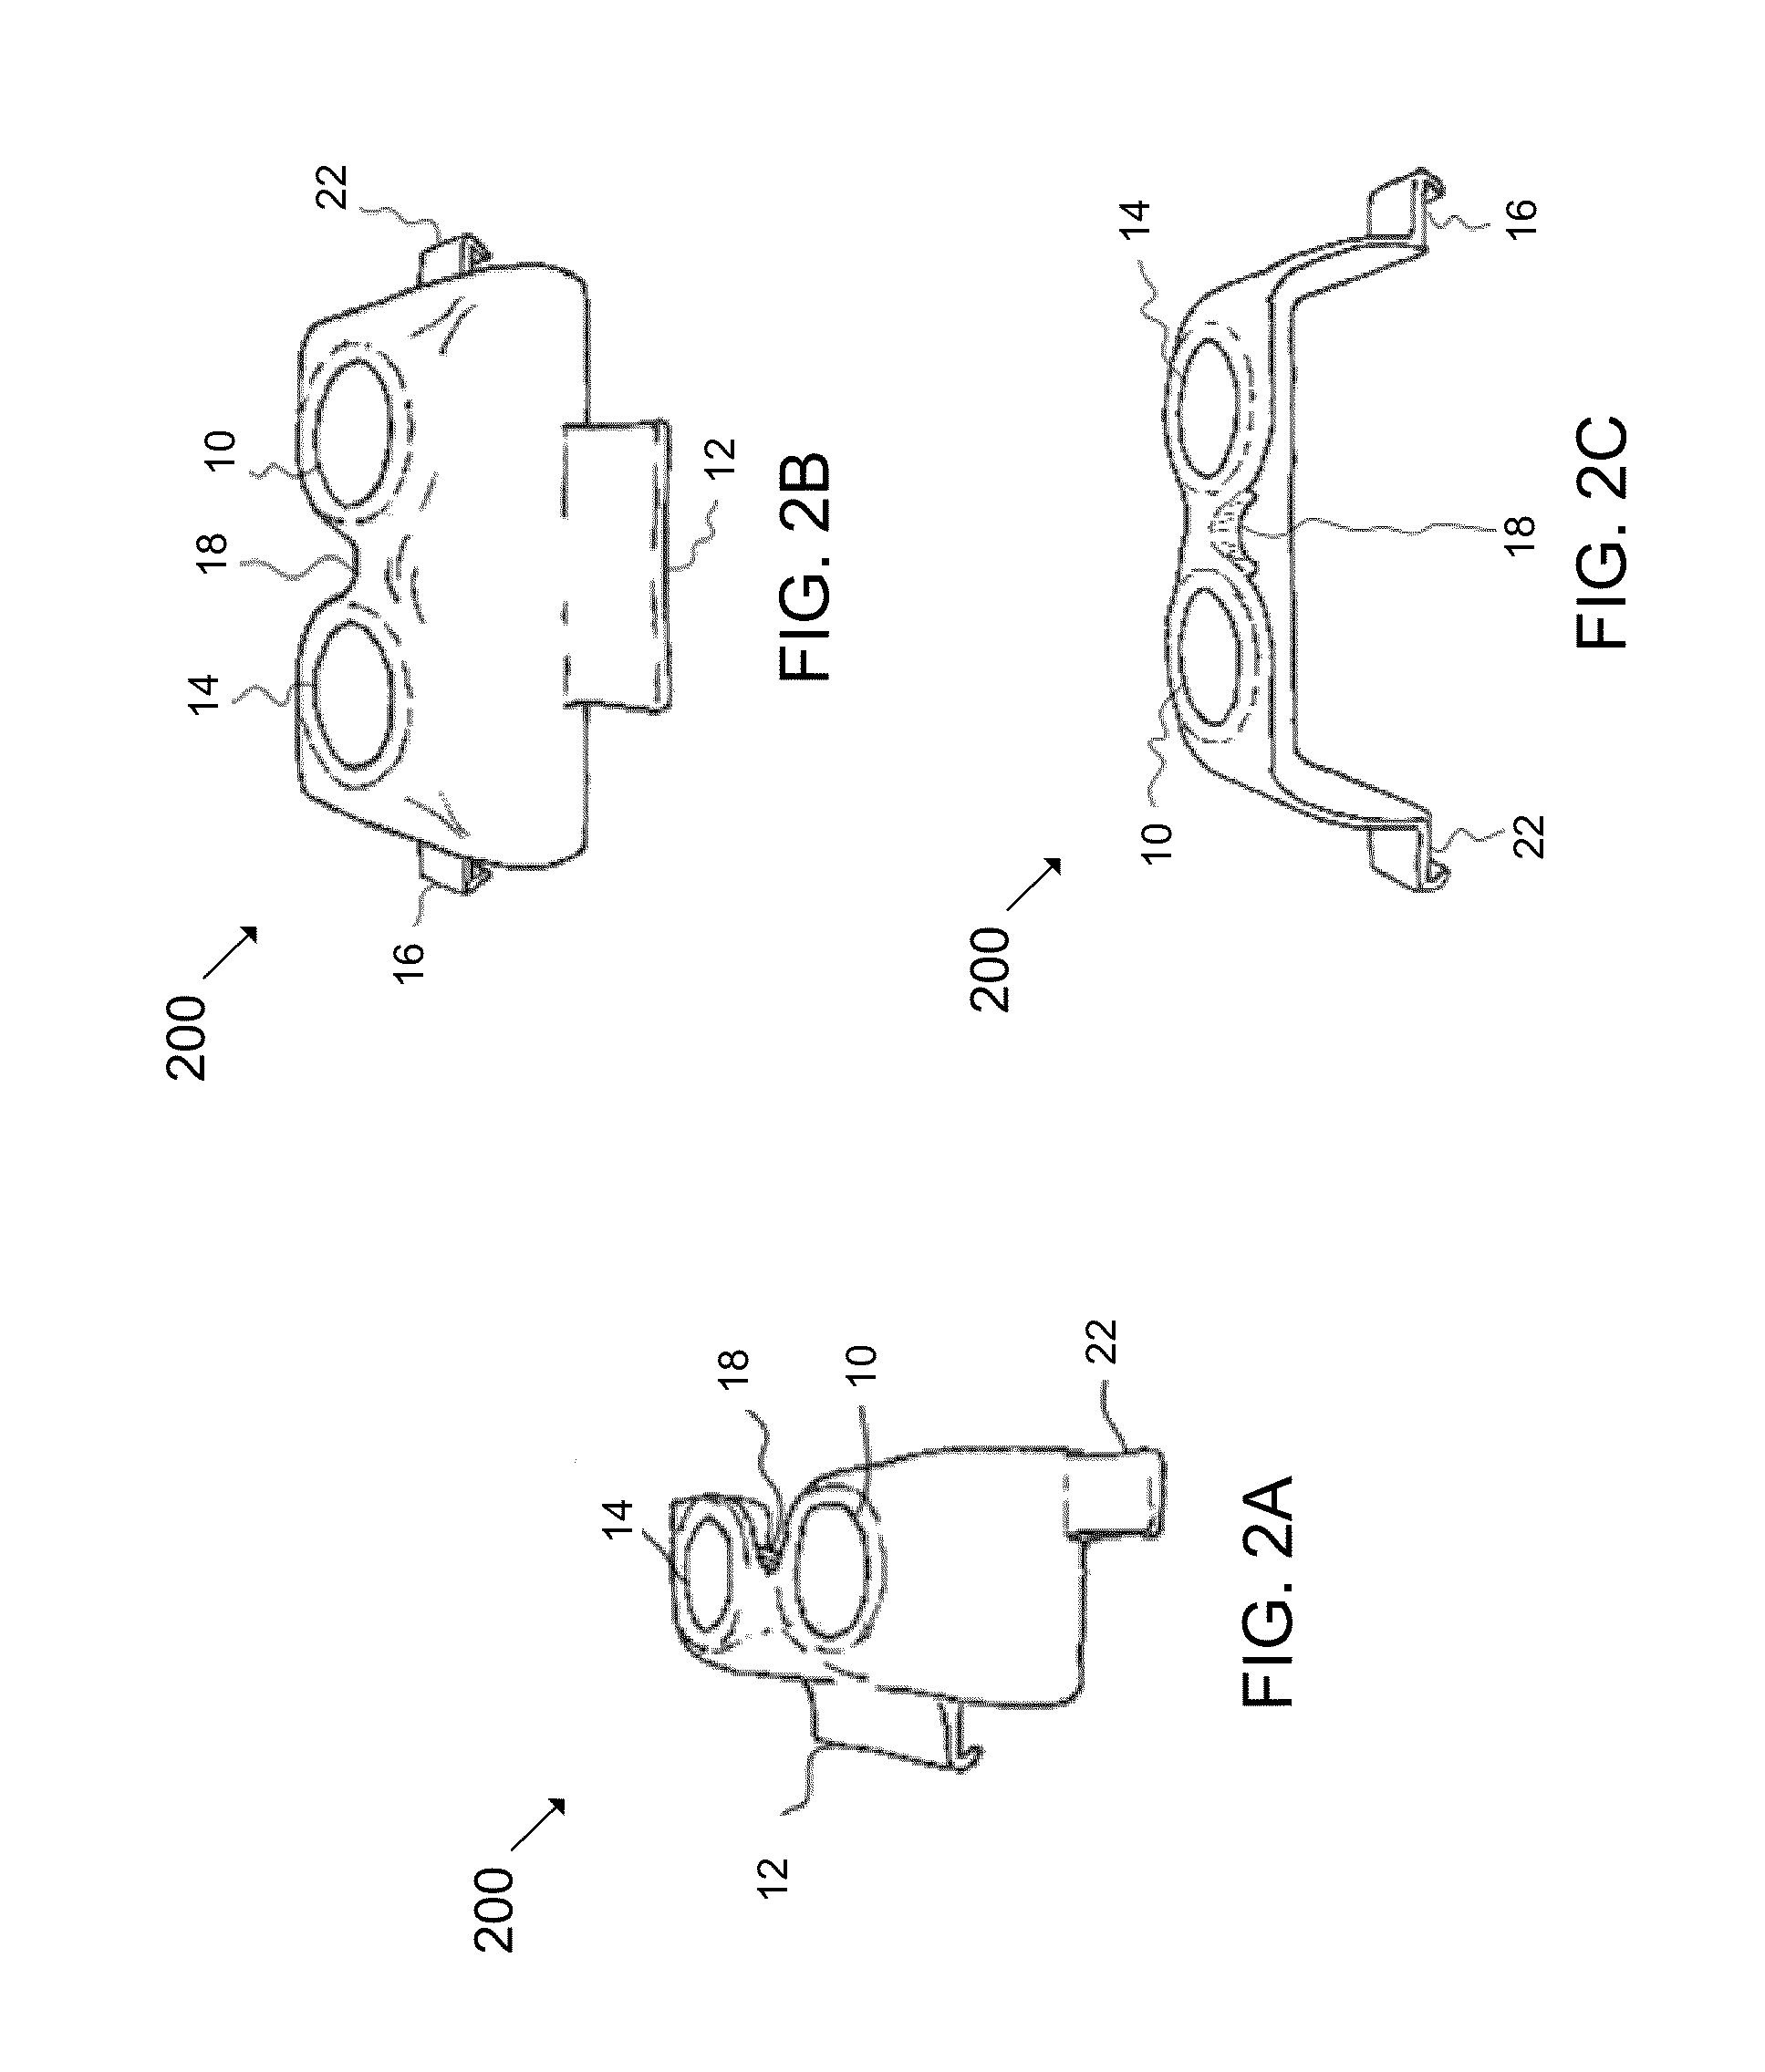 Hybrid stereoscopic viewing device